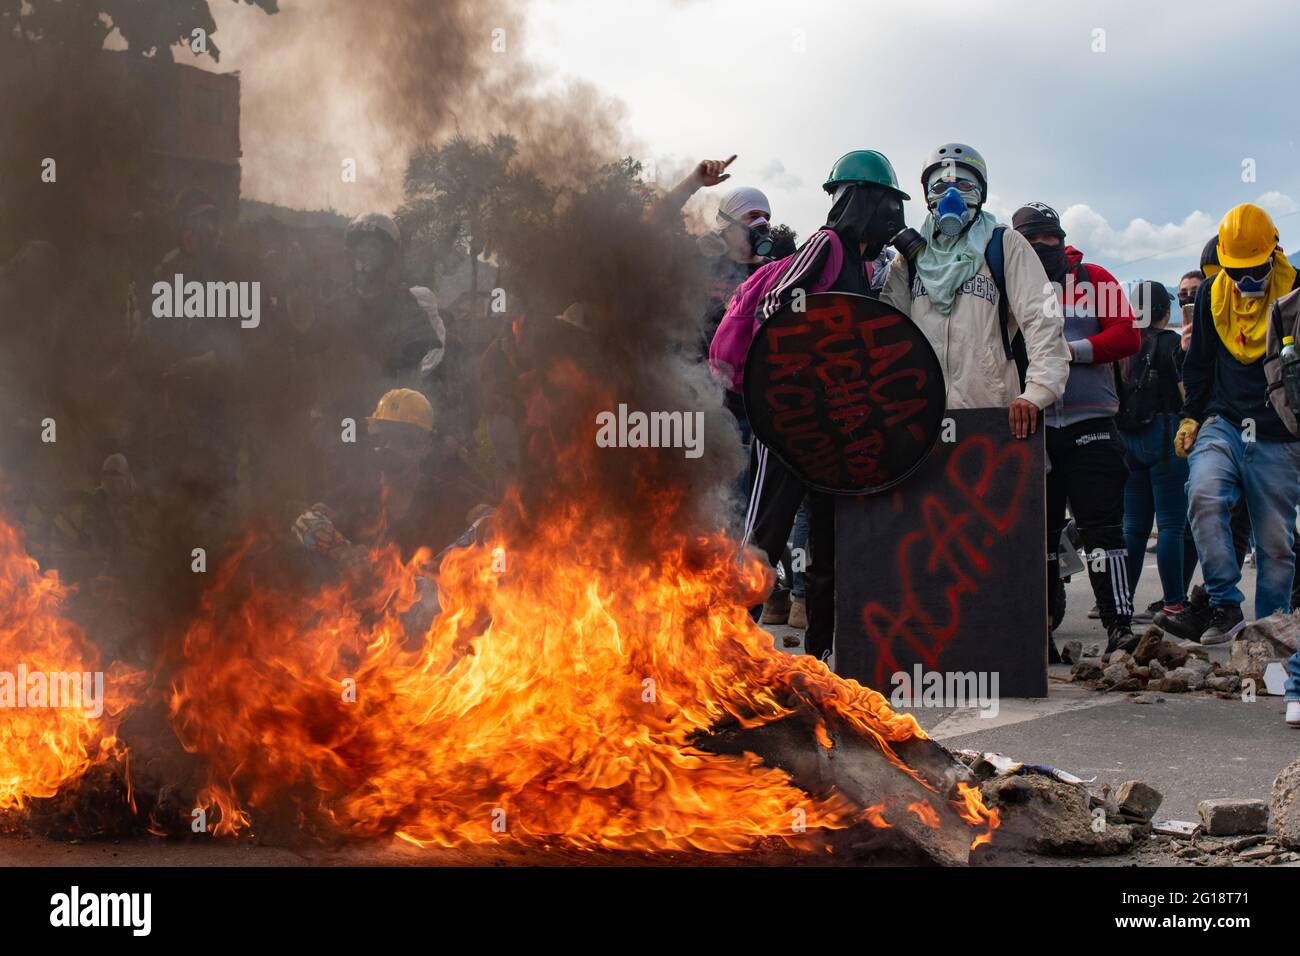 Members of the front line burn tires and debree to prevent the effects of tear gases as clashes between demonstrators and Colombia's riot police (ESMAD) erupt in Medellín, Colombia after several weeks of anti-government protest against President Ivan Duque's tax and health reforms and unrest and abuse of authority cases that leave at least 70 dead according to NGOs on June 4, 2021. Stock Photo